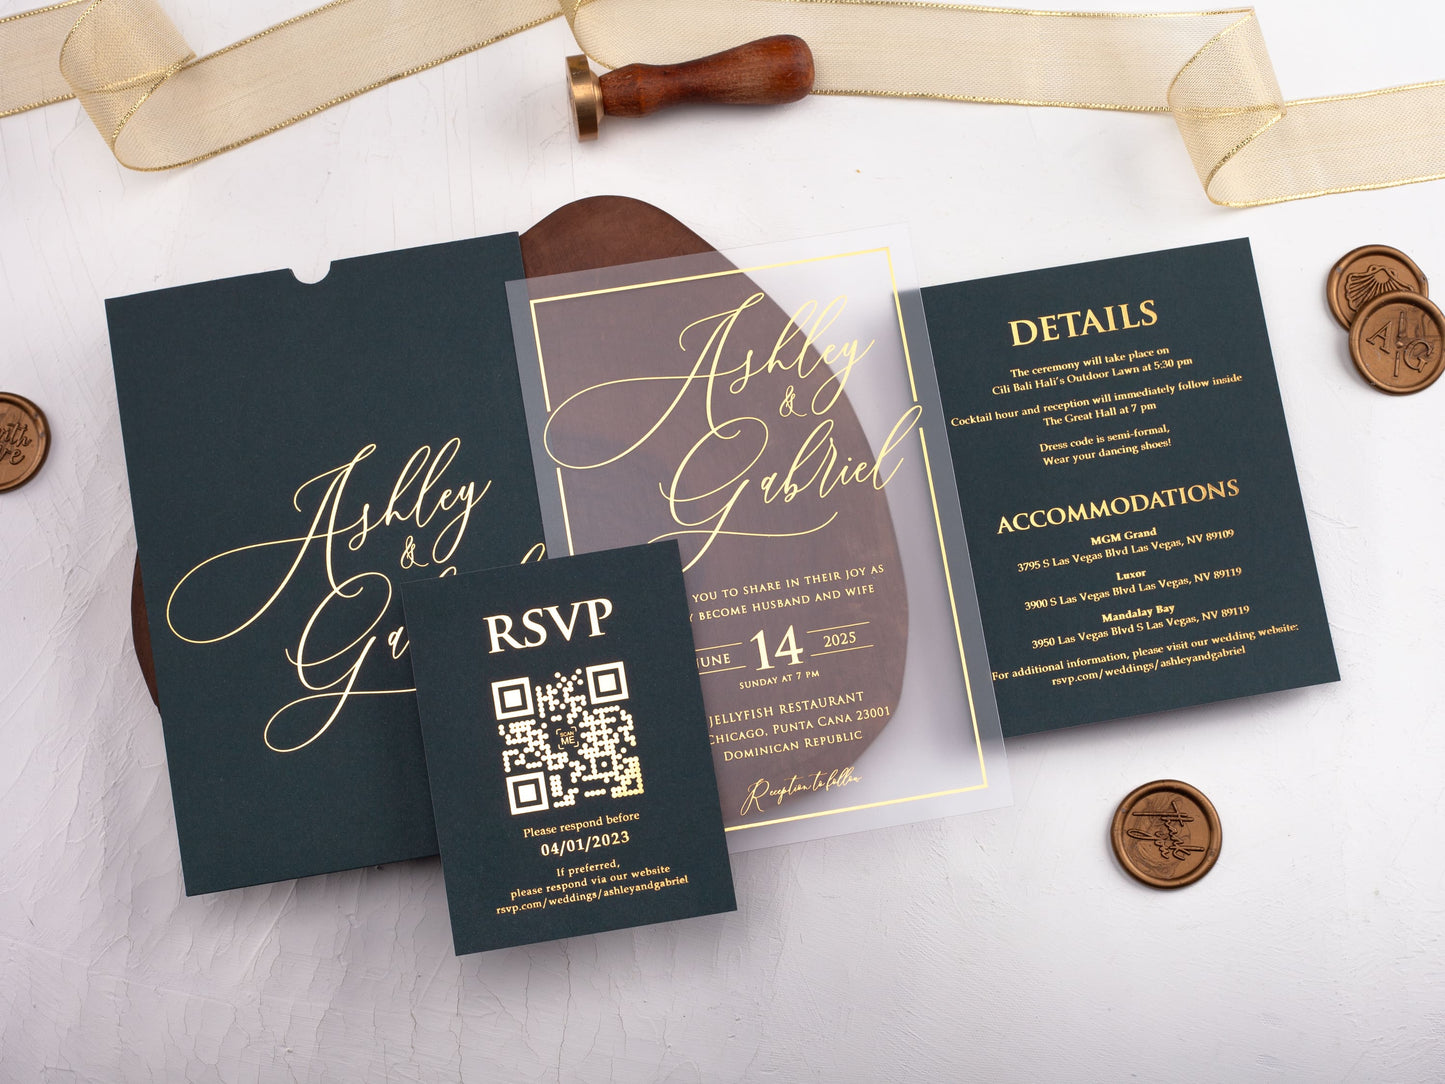 Acrylic Wedding Invitation with Gold Foil Print and Dark Green Sleeve Envelope